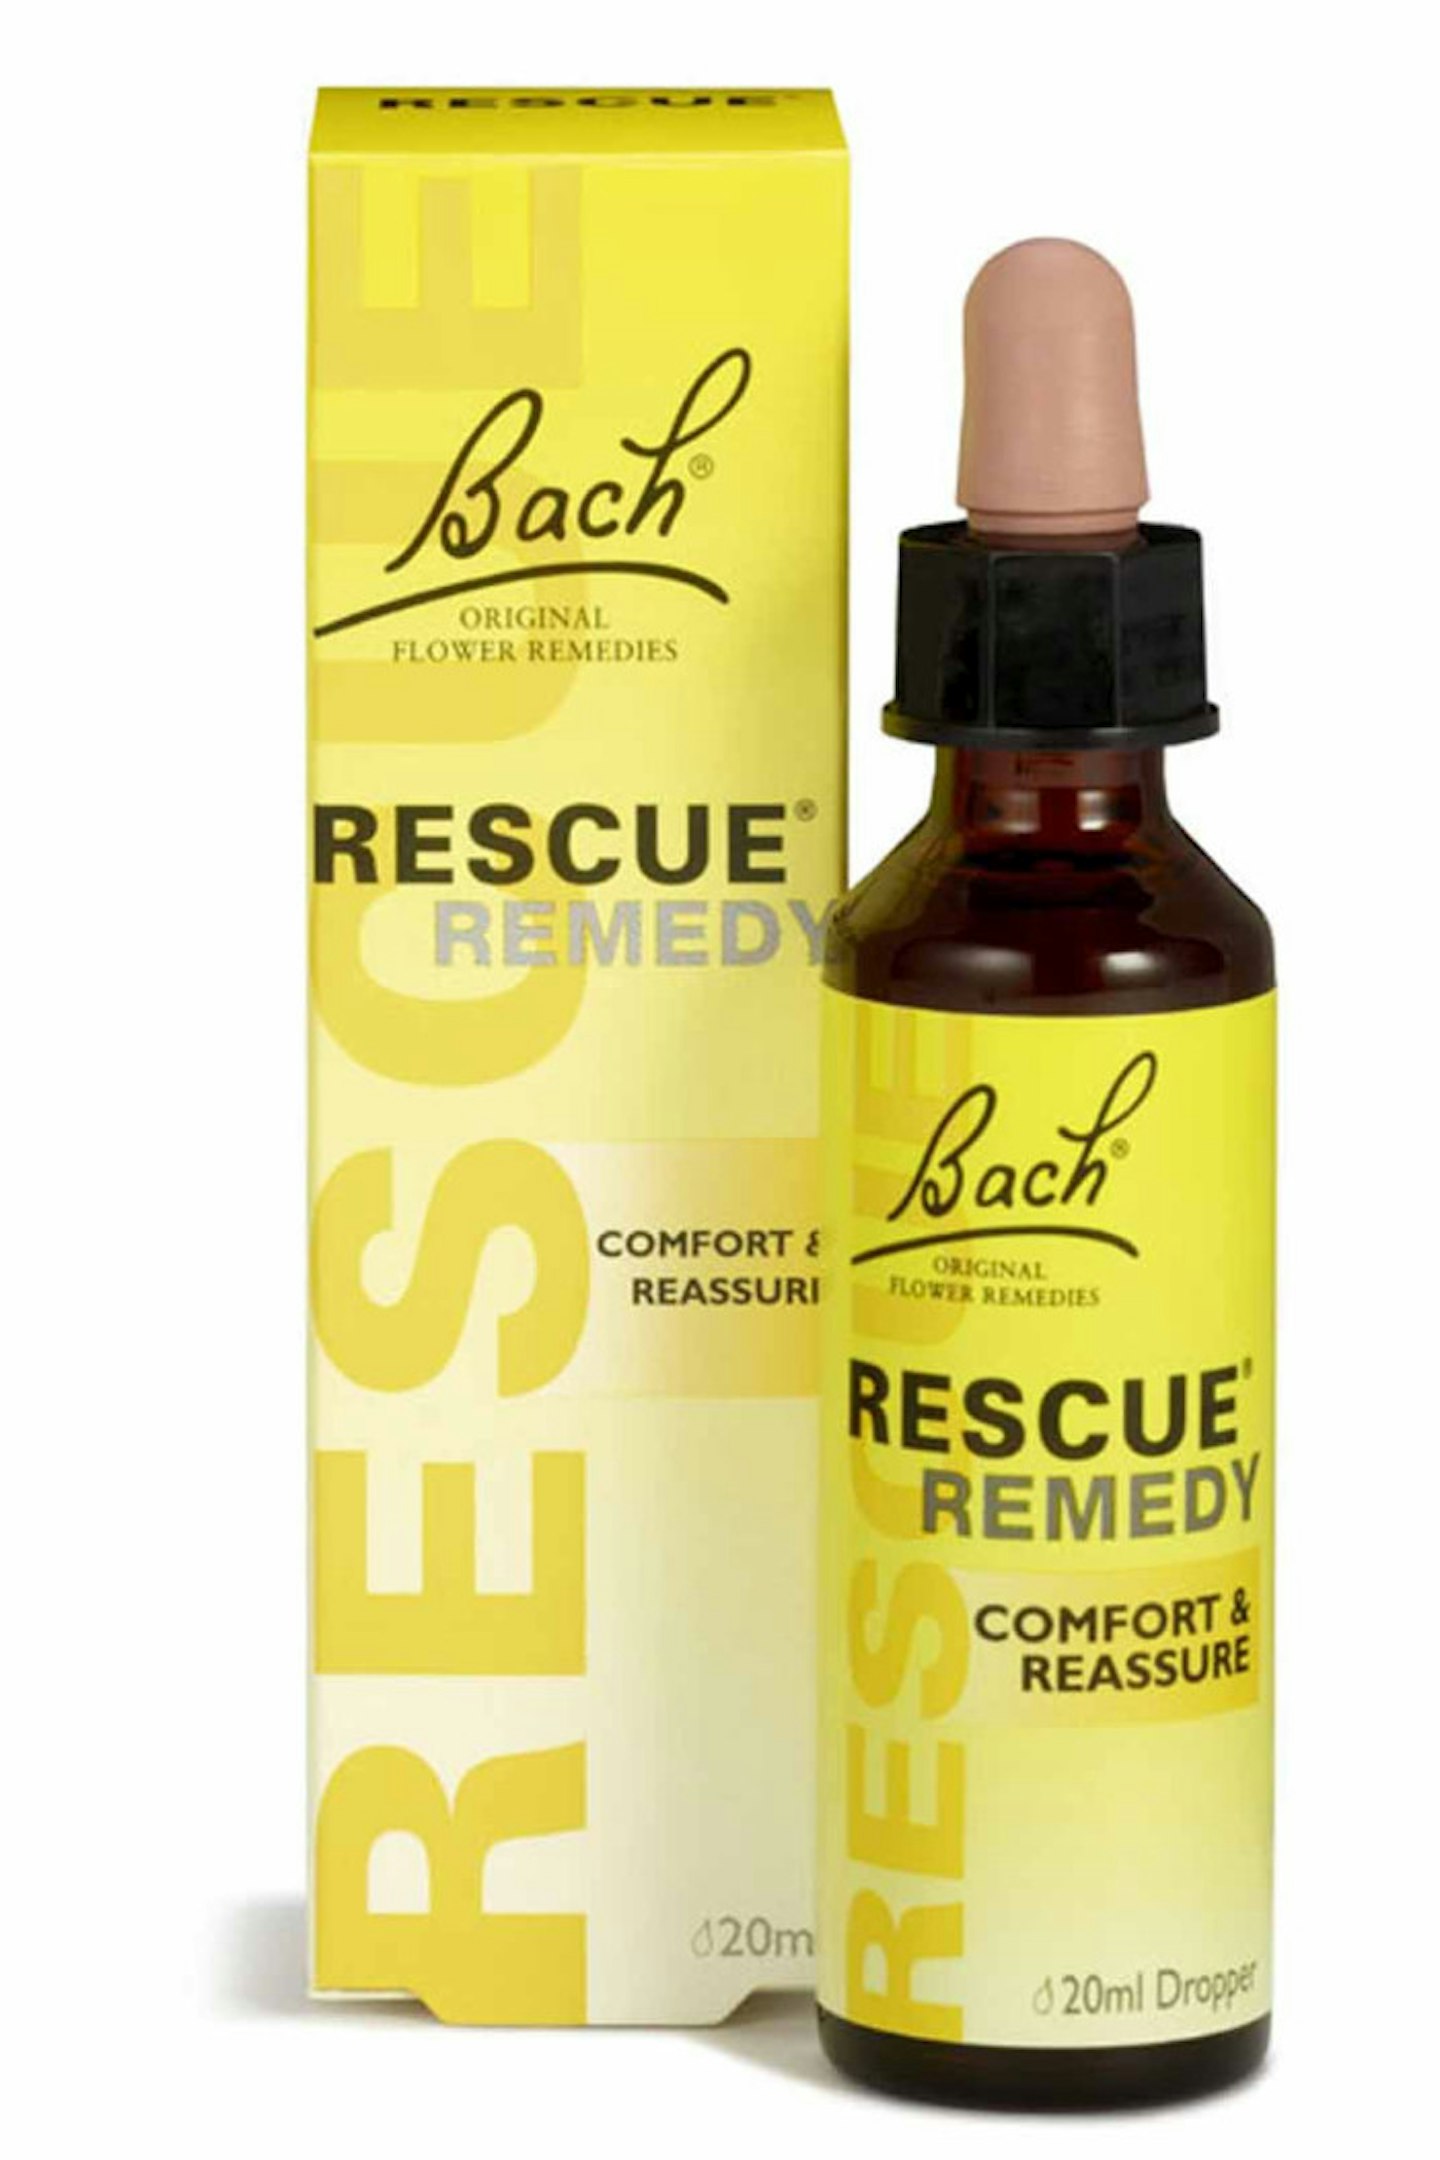 Bach Rescue Remedy, £7.99, Boots